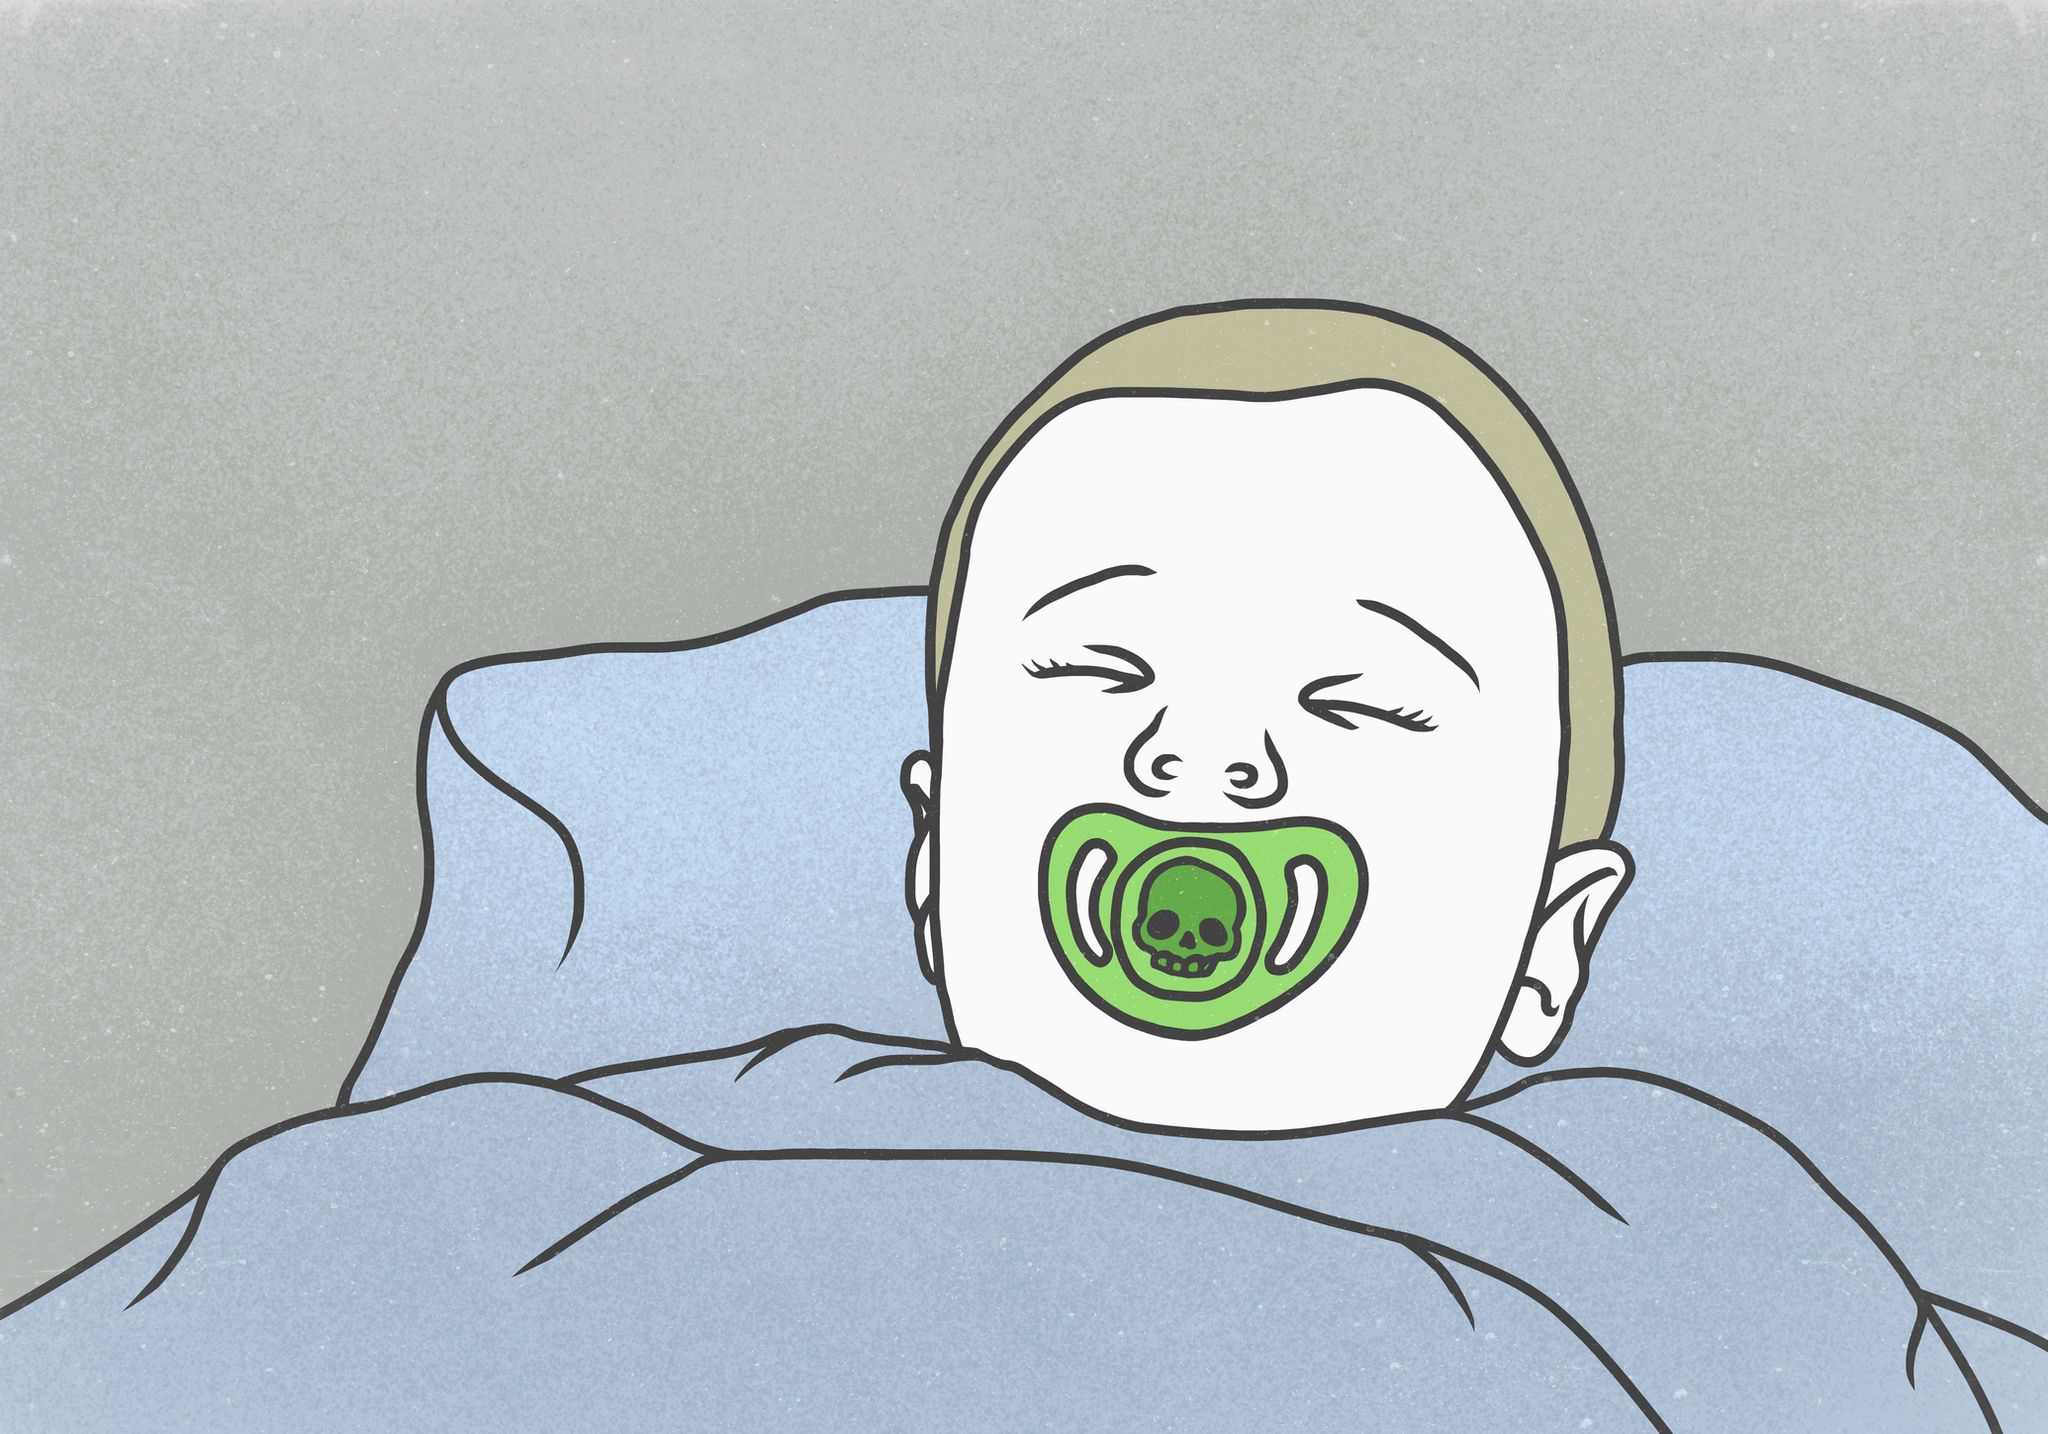 illustration of boy sleeping with pacifier against gray background